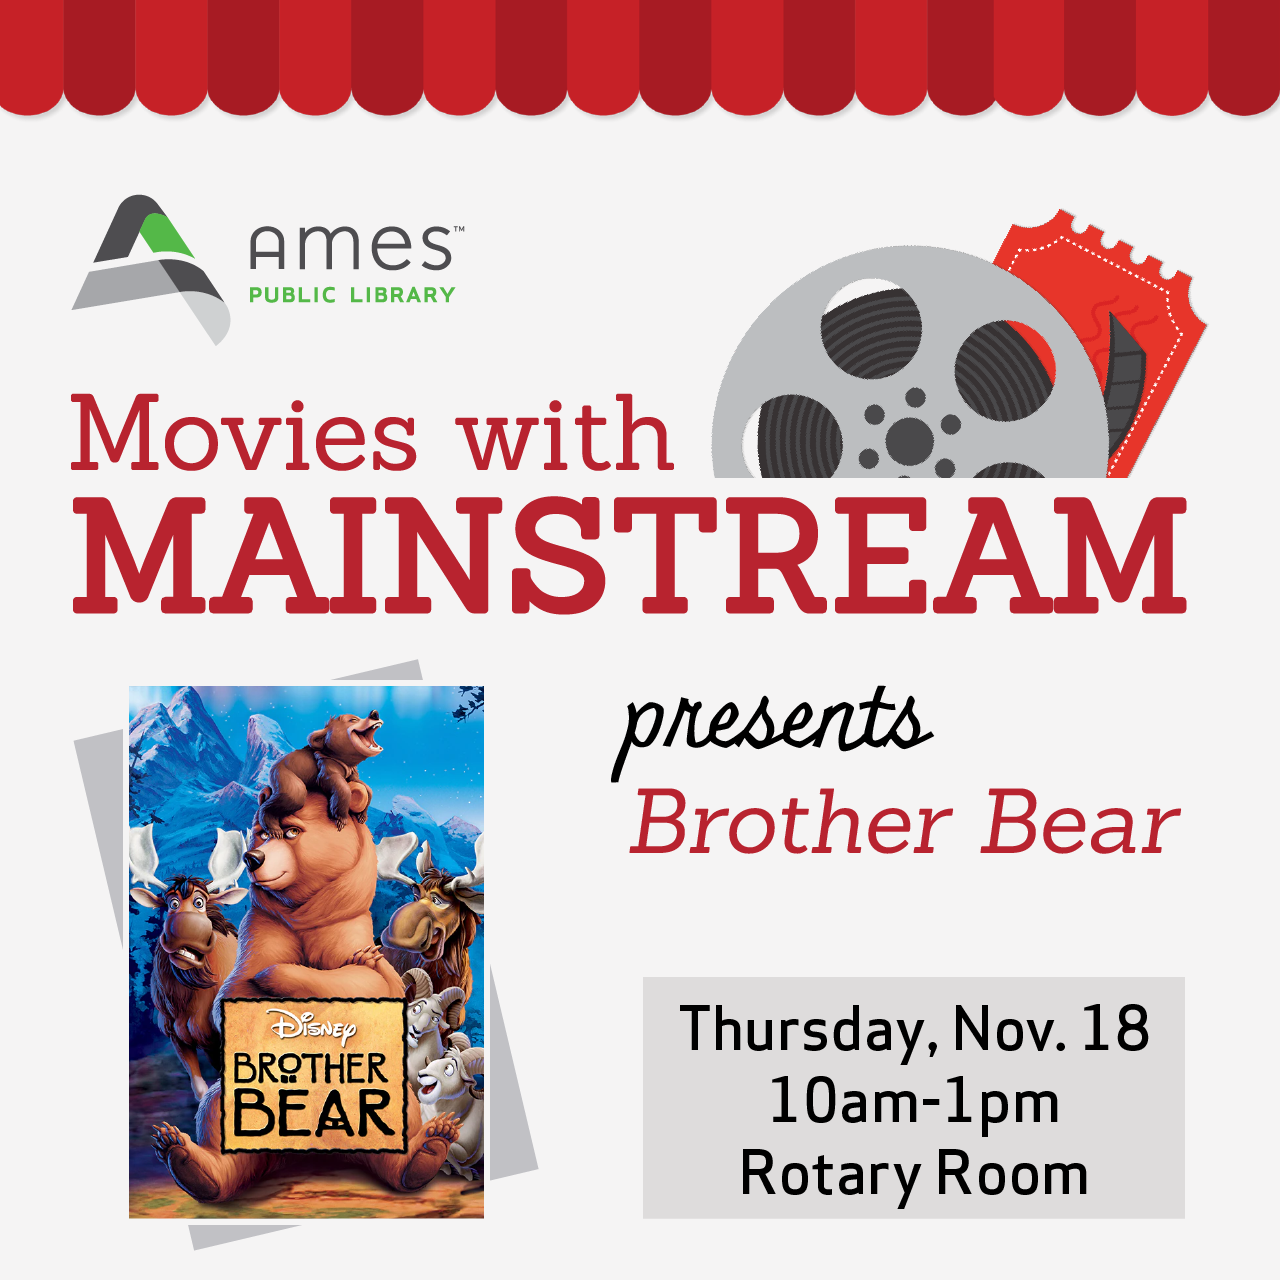 Movies with Mainstream presents Brother Bear Thursday, Nov. 18, 10am-1pm, Rotary Room